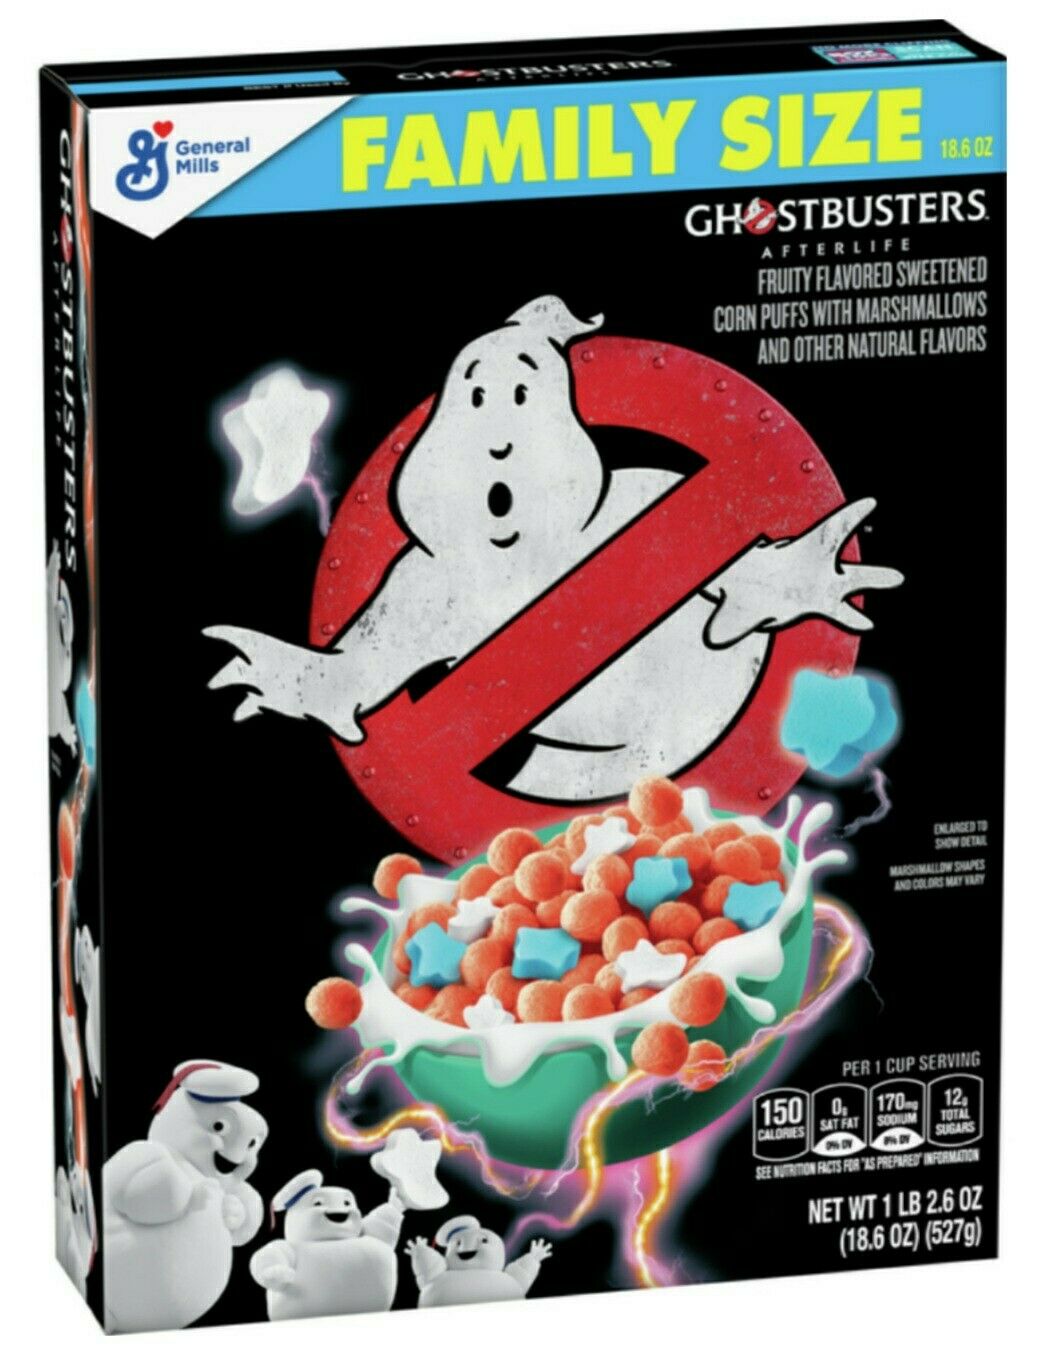 General Mills Ghostbusters Afterlife Family Size Cereal 18.6 Oz